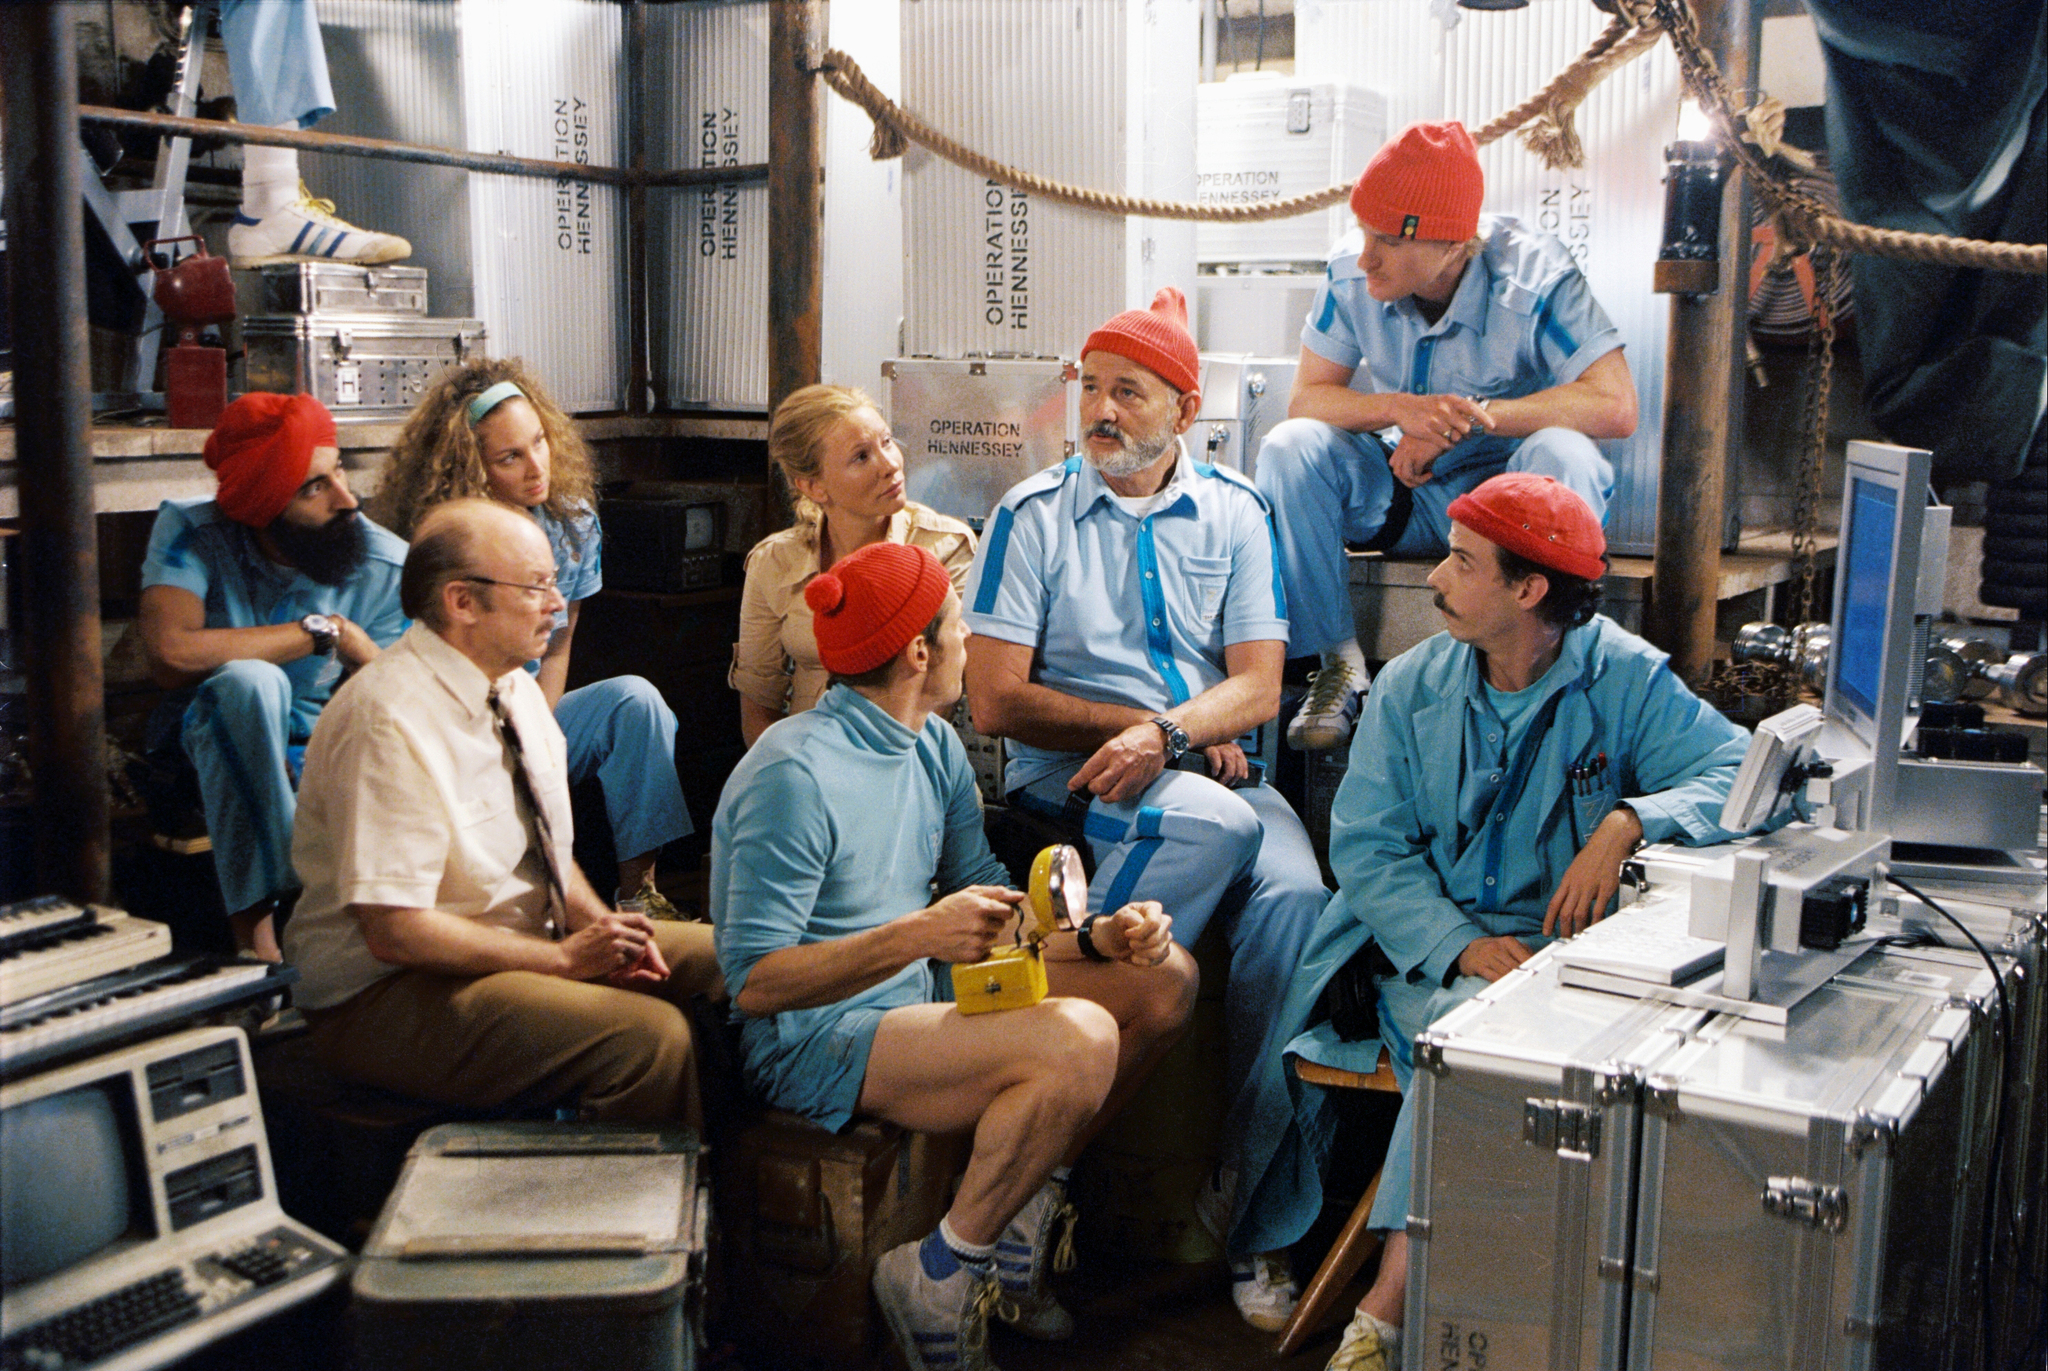 Team Zissou in a meeting to prepare the mission